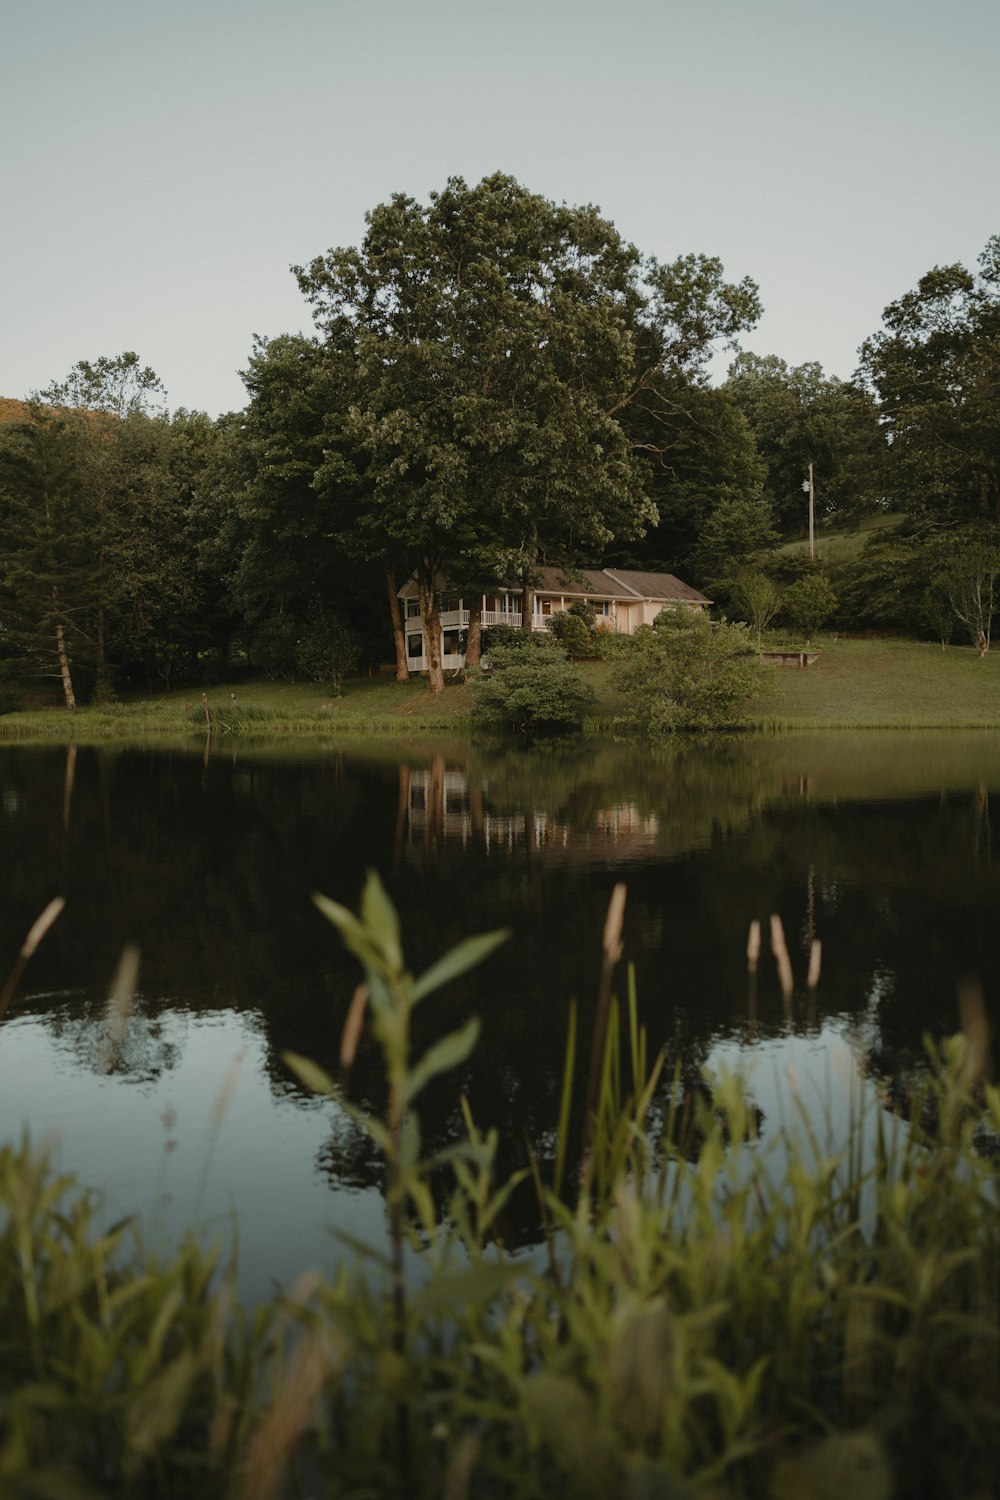 a house sitting on top of a lush green field next to a lake